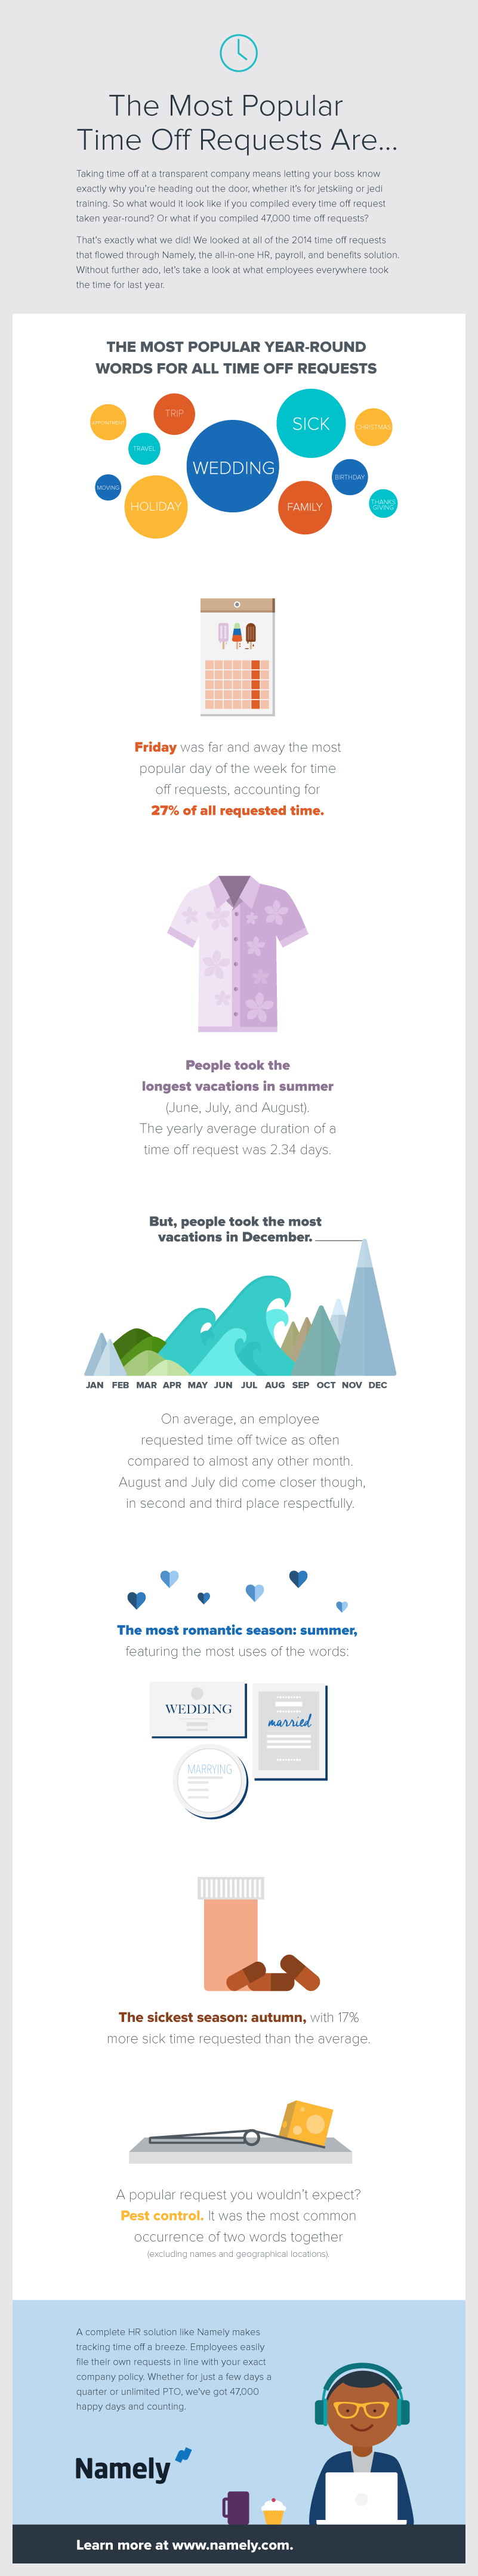 Time Off Requests Infographic